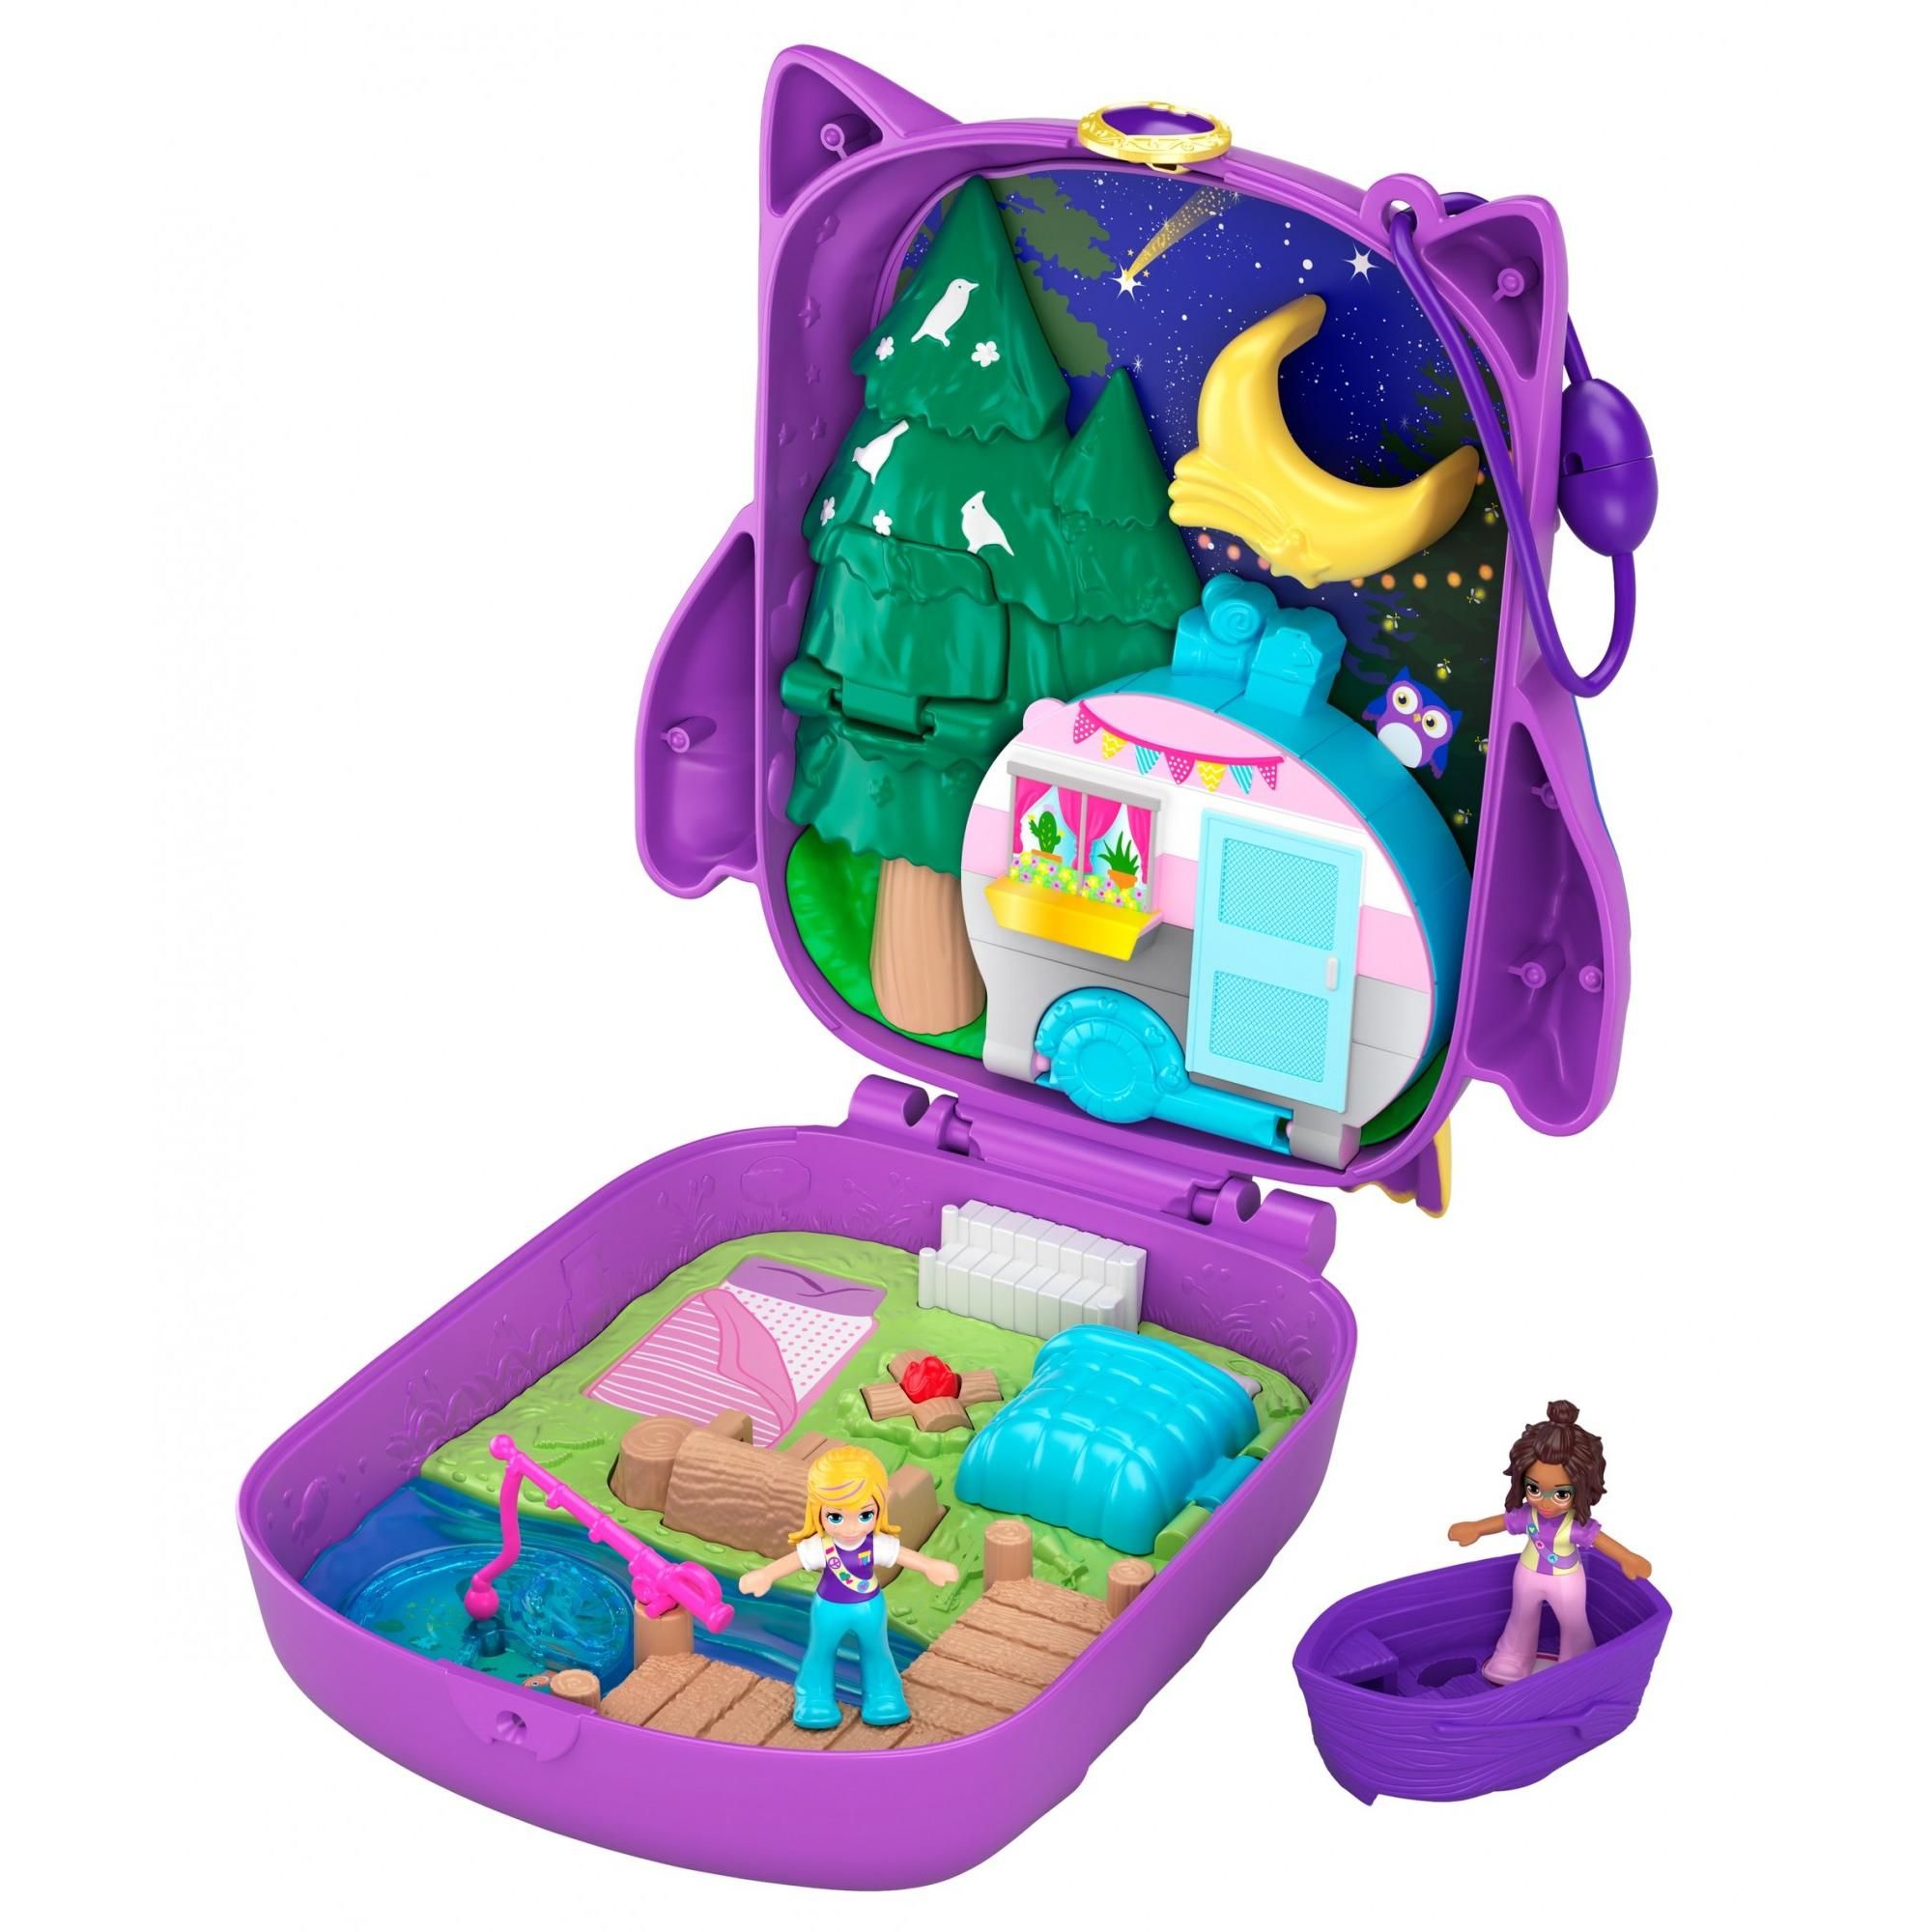 Compact Polly Pocket goes on a camping adventure. 